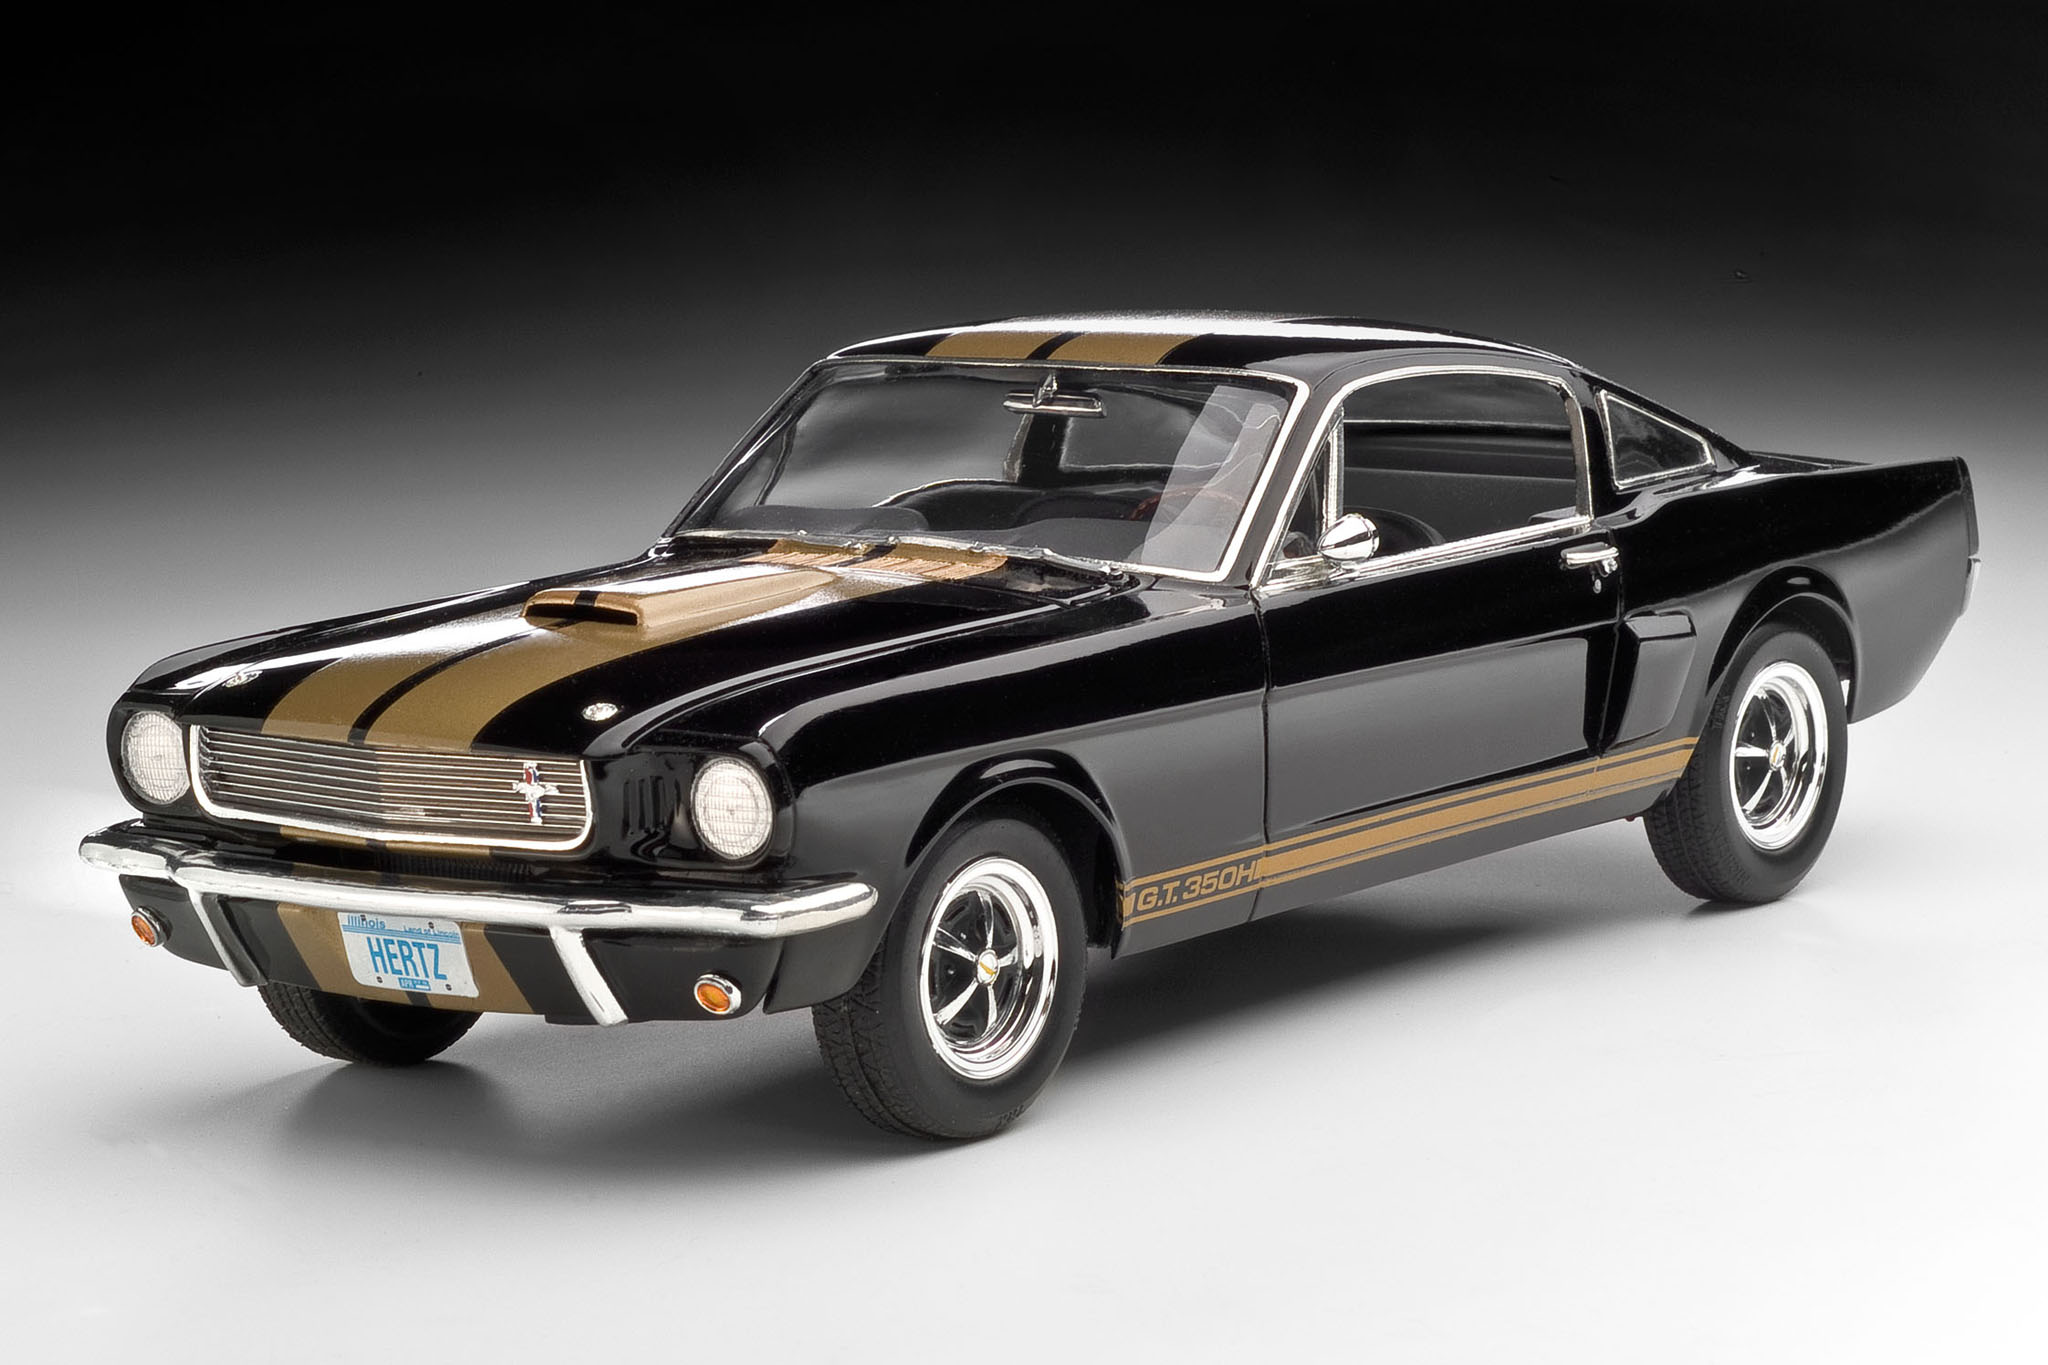 Shelby Mustang GT 350 H - Shelby Mustang GT 350 H